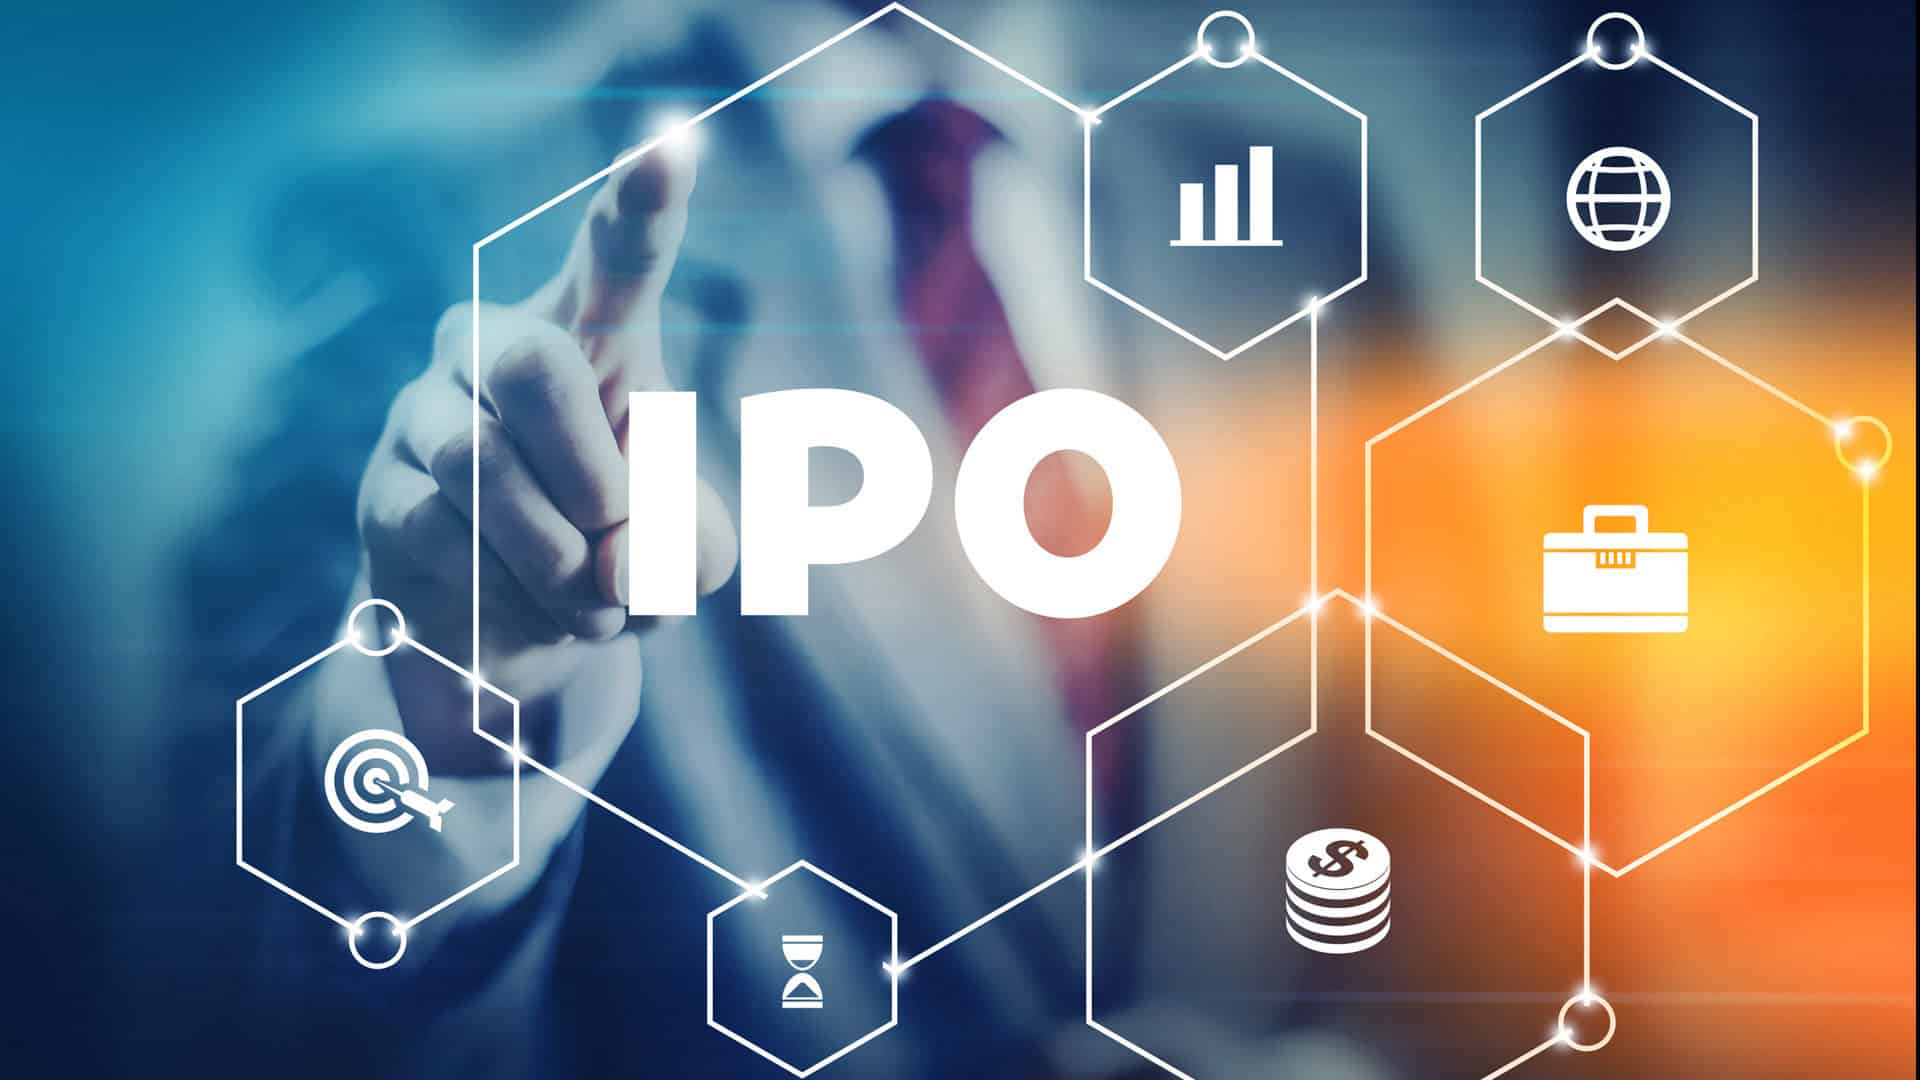 Allied Blenders and Distillers, 2 others get Sebi's go ahead to float IPO